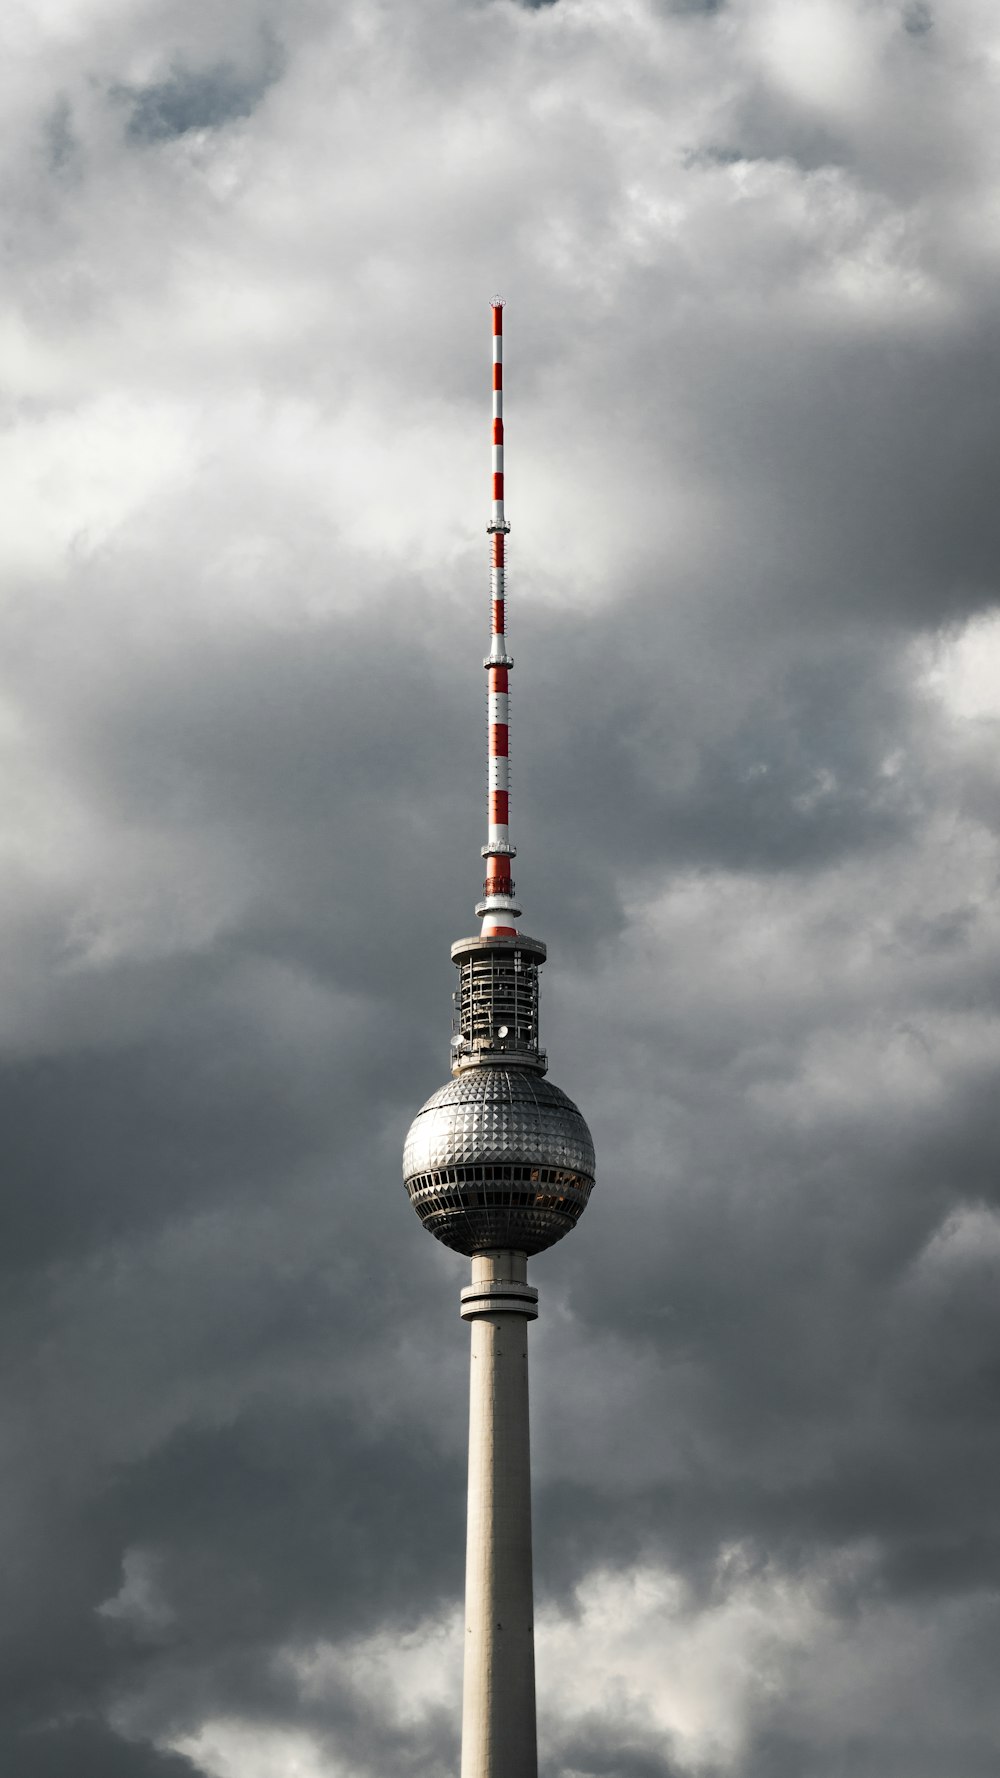 a tall tower with a red and white flag on top